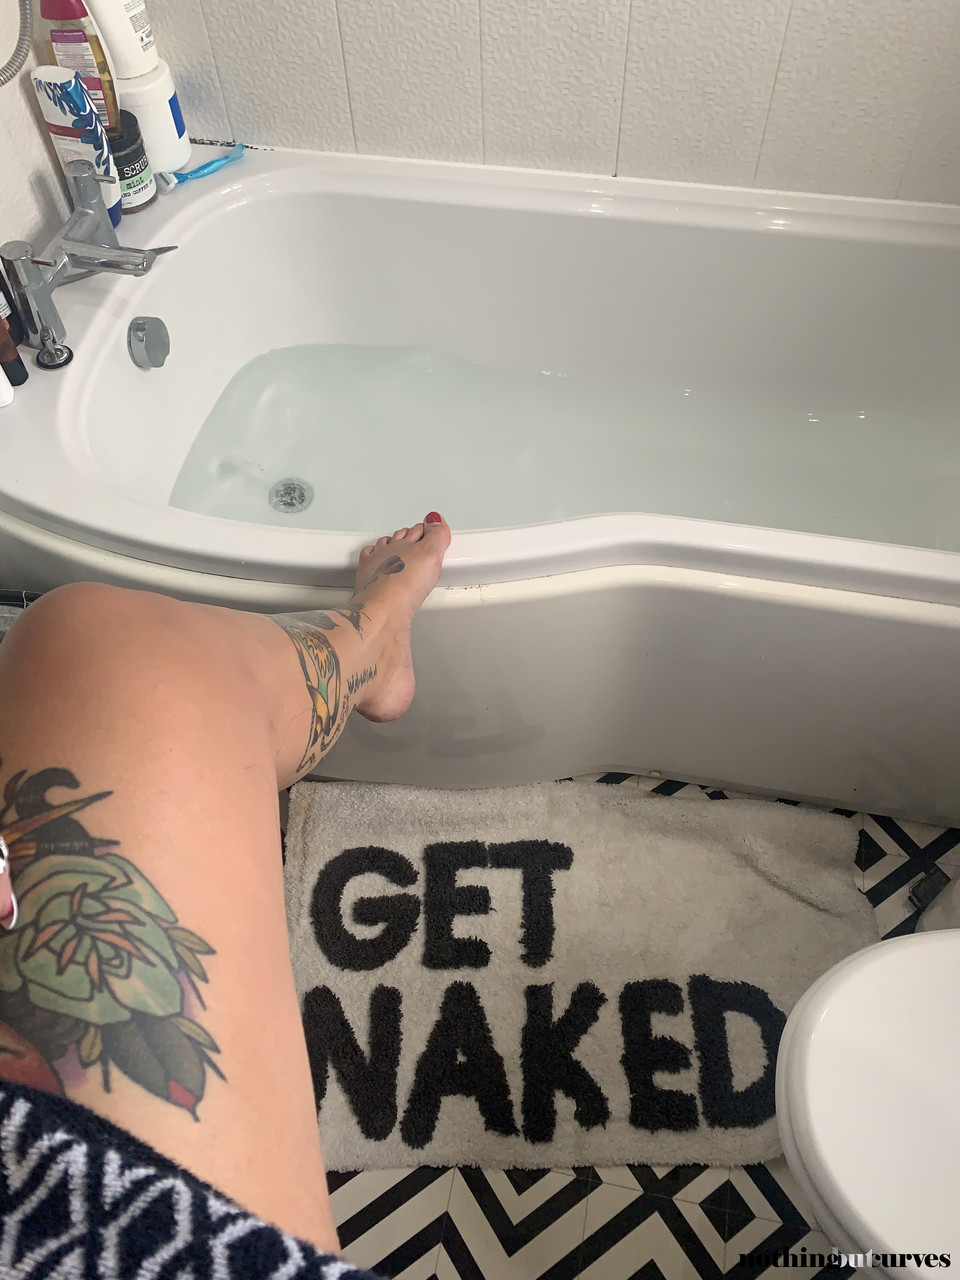 Inked fatty Cherrie Pie flaunts her big breasts while having a bath foto porno #424173947 | Nothing But Curves Pics, Cherrie Pie, Tattoo, porno móvil